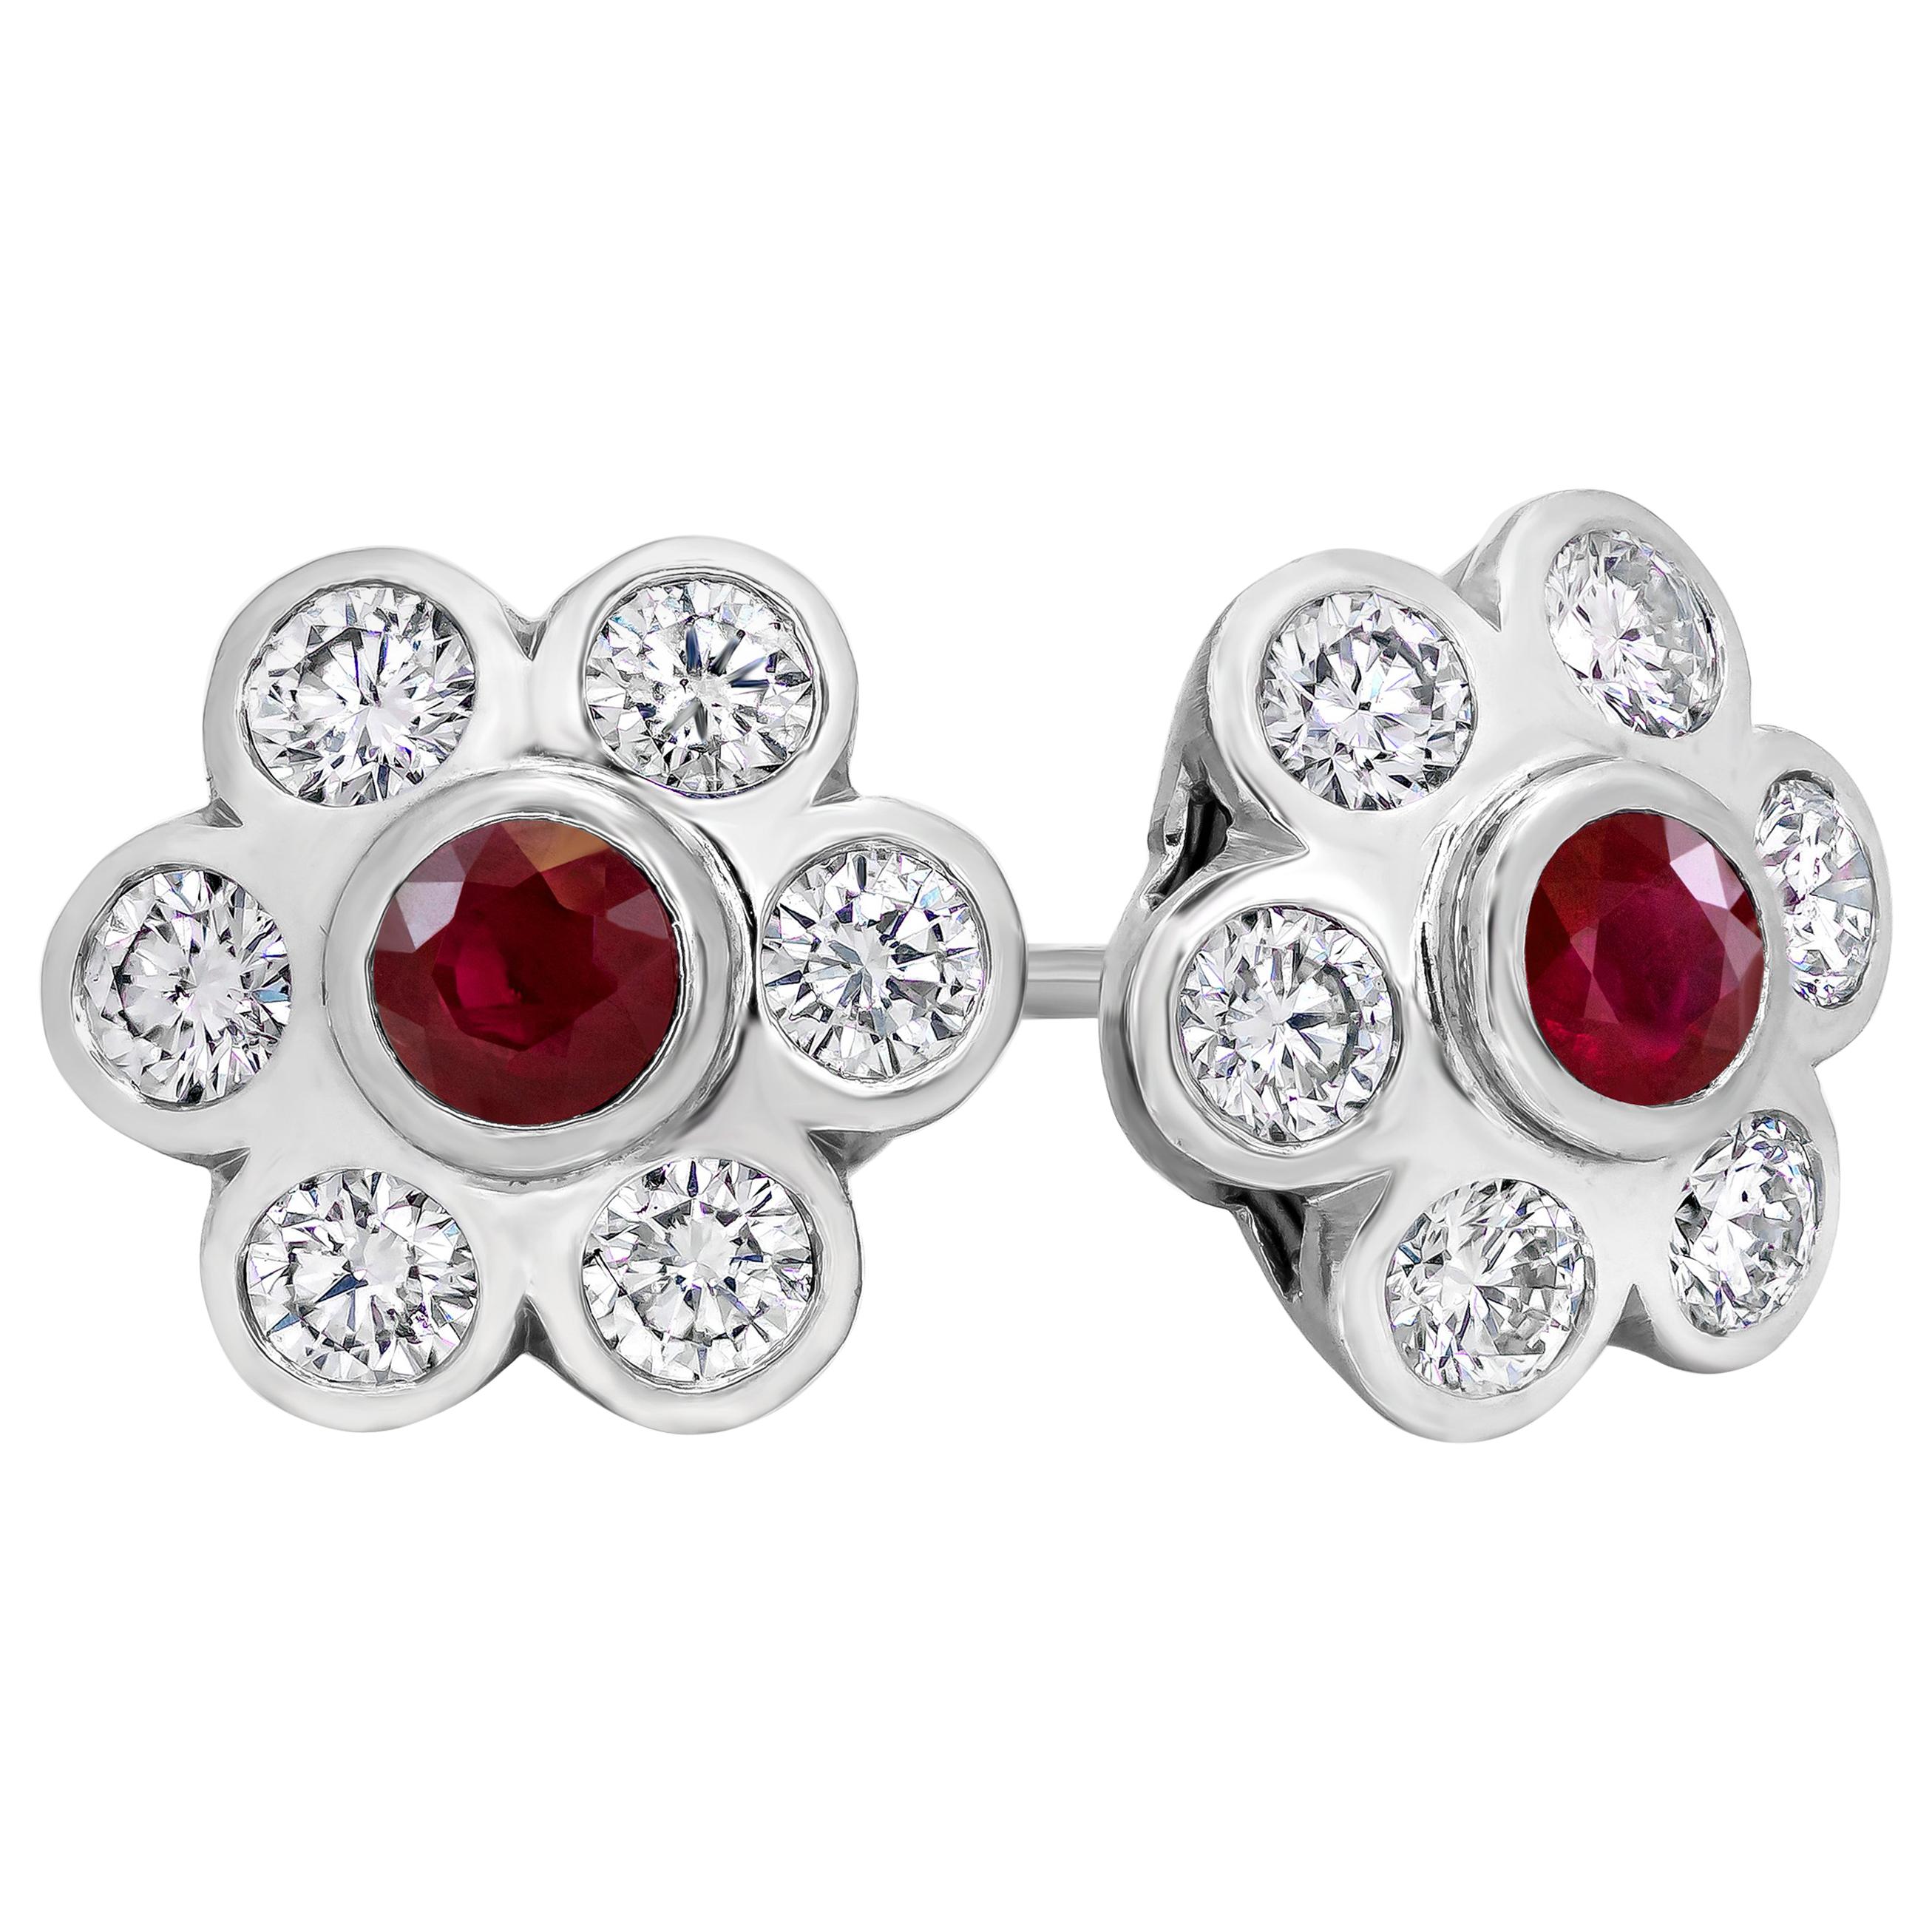 Roman Malakov 2.07 Carats Total Ruby and Diamond Flower Earrings in White Gold